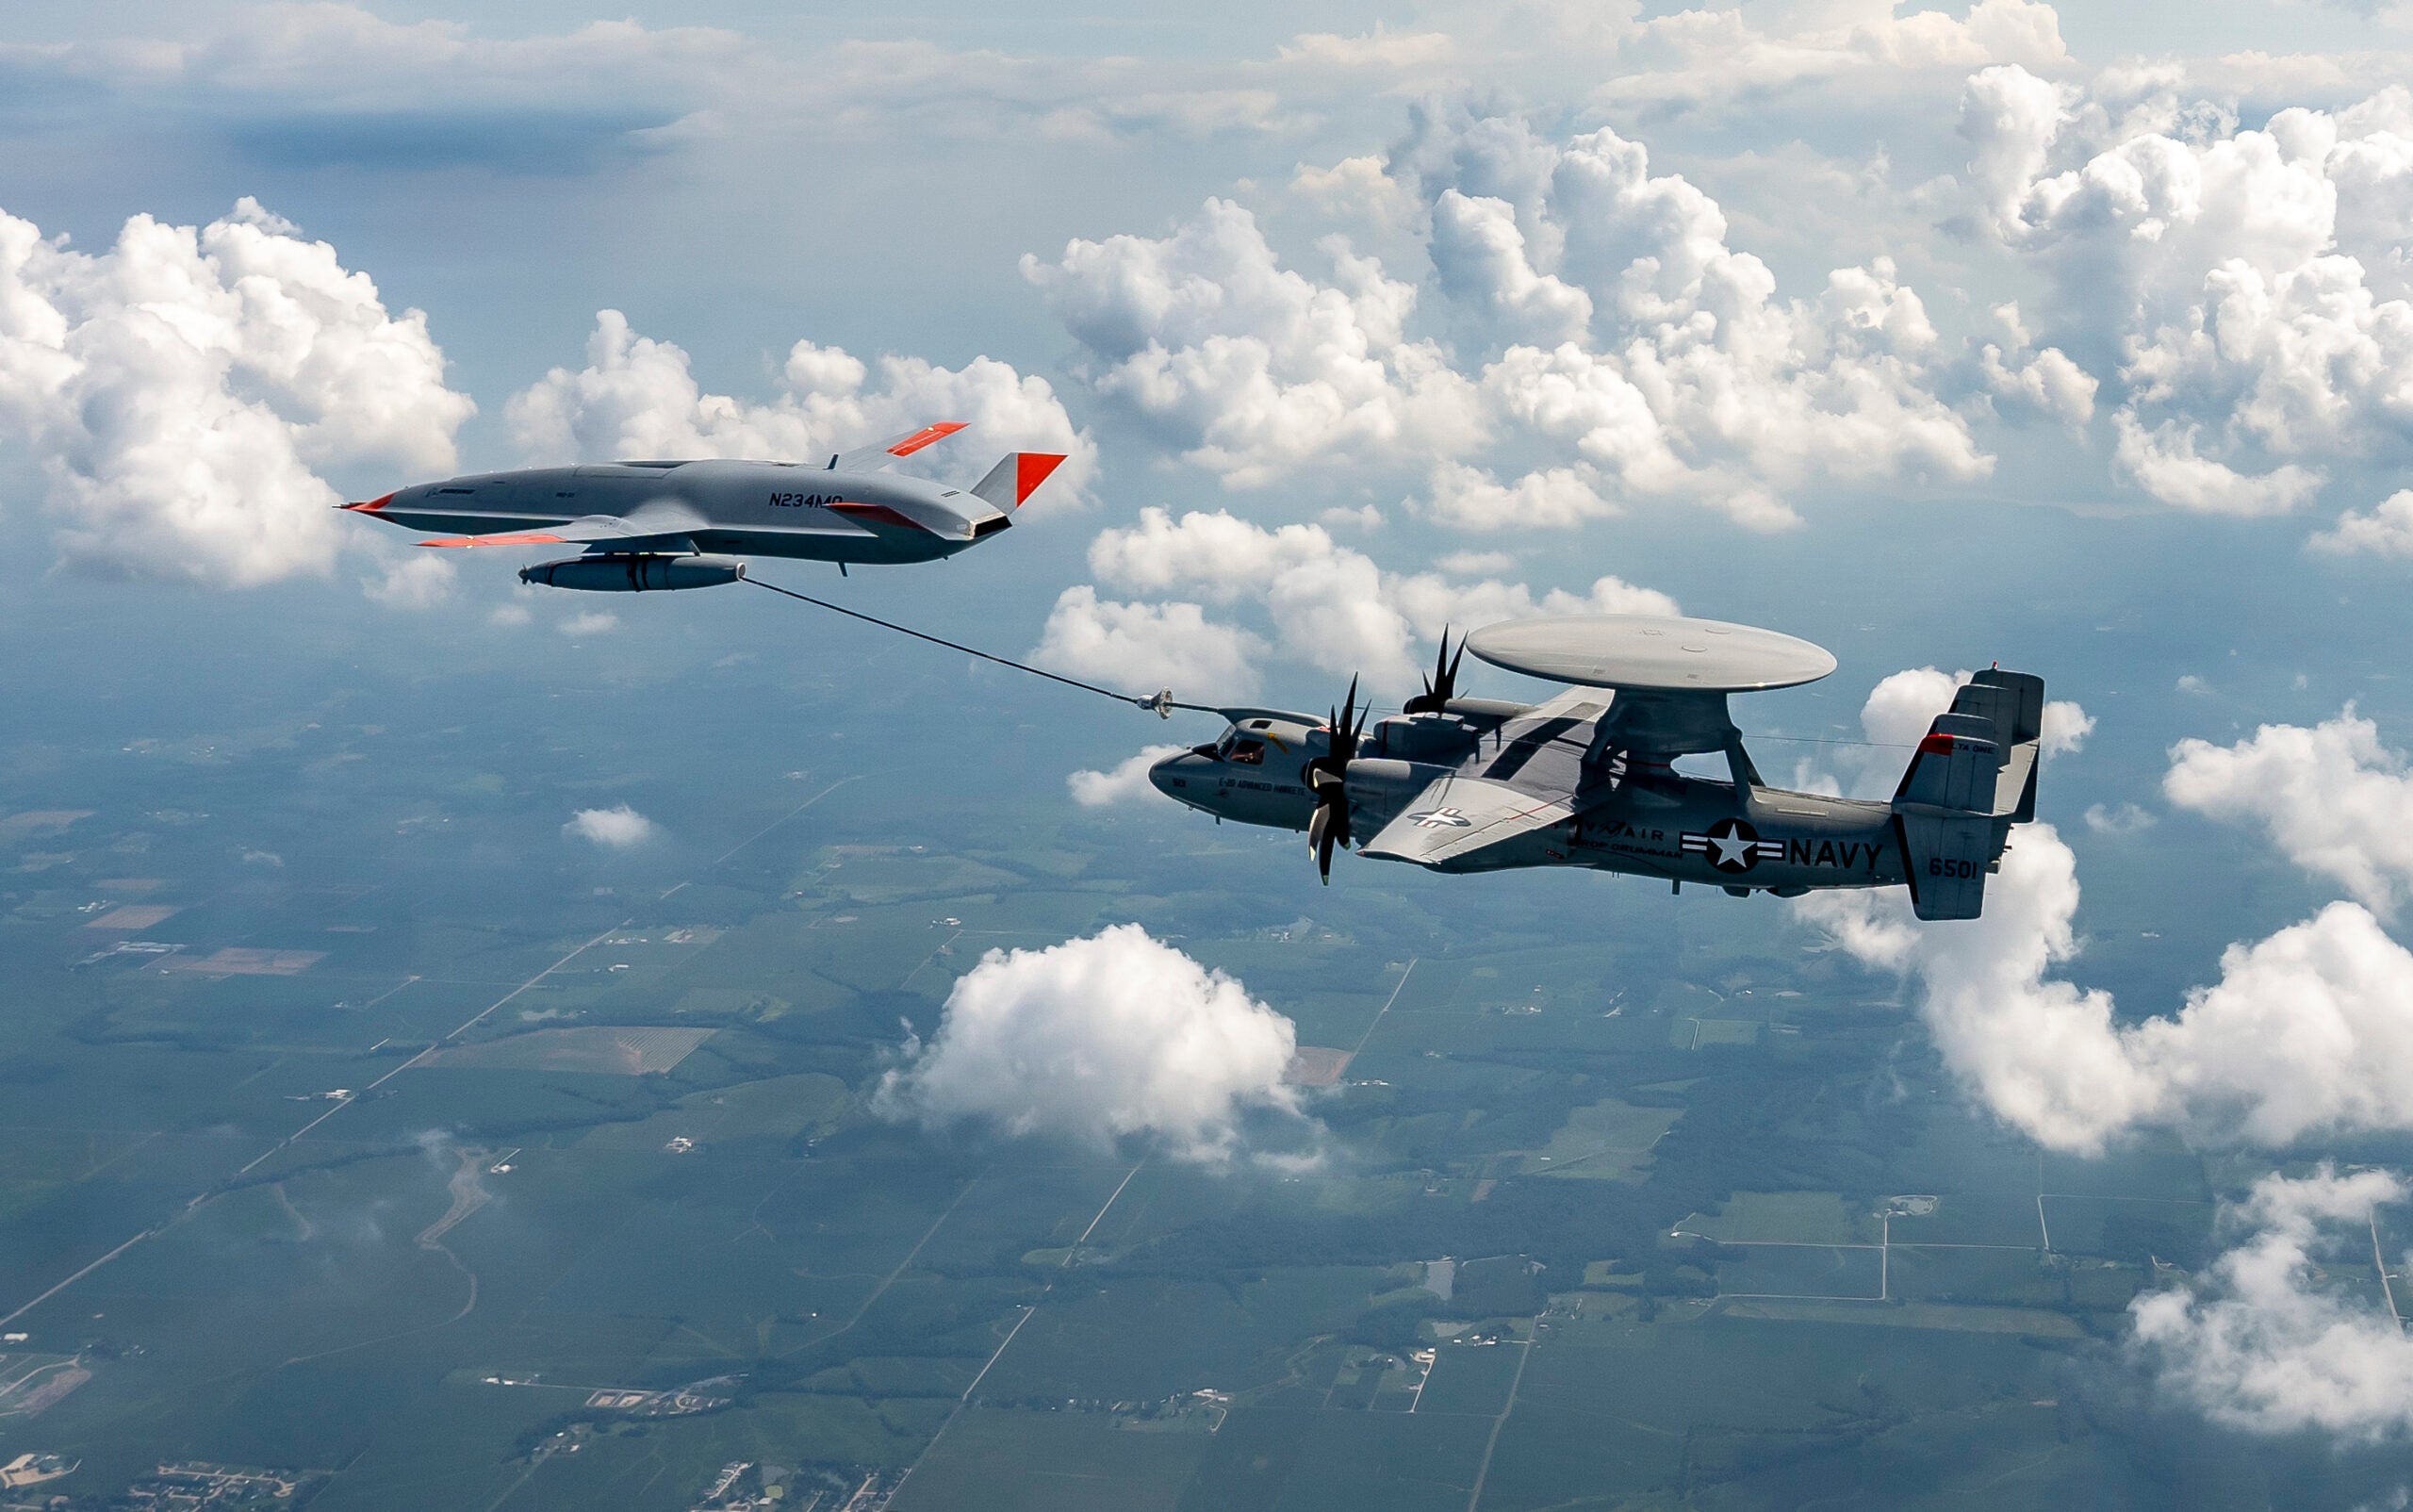 MASCOUTAH, Ill. (Aug. 18, 2021) An MQ-25 Stingray unmanned aerial vehicle refuels an E-2D Advanced Hawkeye aircraft over MidAmerica Airport in Mascoutah, Ill,, Aug. 18, 2021. This test marks the second successful refueling flight for the MQ-25 program. The six-hour flight, conducted by Air Test and Evaluation Squadron (VX) 20, tested the Boeing-owned MQ-25 test asset's fuel transfer, formation evaluations, wake surveys, drogue tracking and plugs at 220 knots calibrated airspeed at 10,000 feet. (U.S. Navy photo courtesy of Boeing